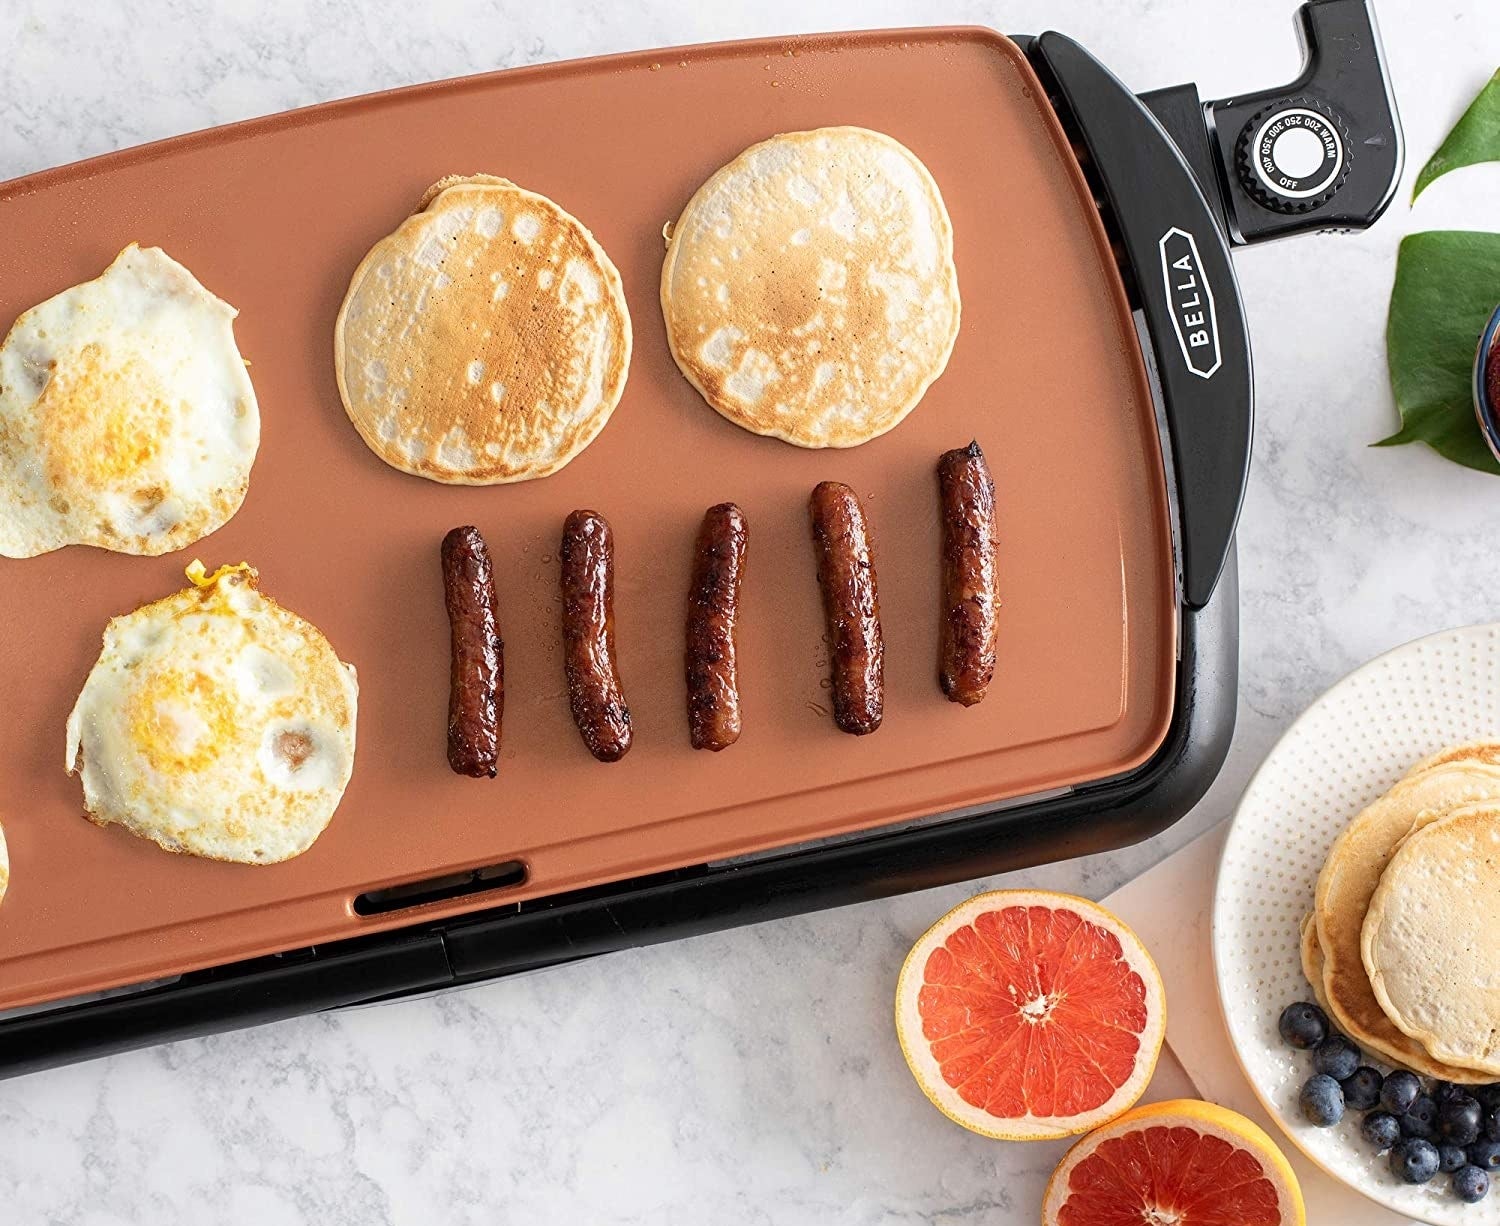 the griddle topped with breakfast food, like pancakes, sausages, and eggs